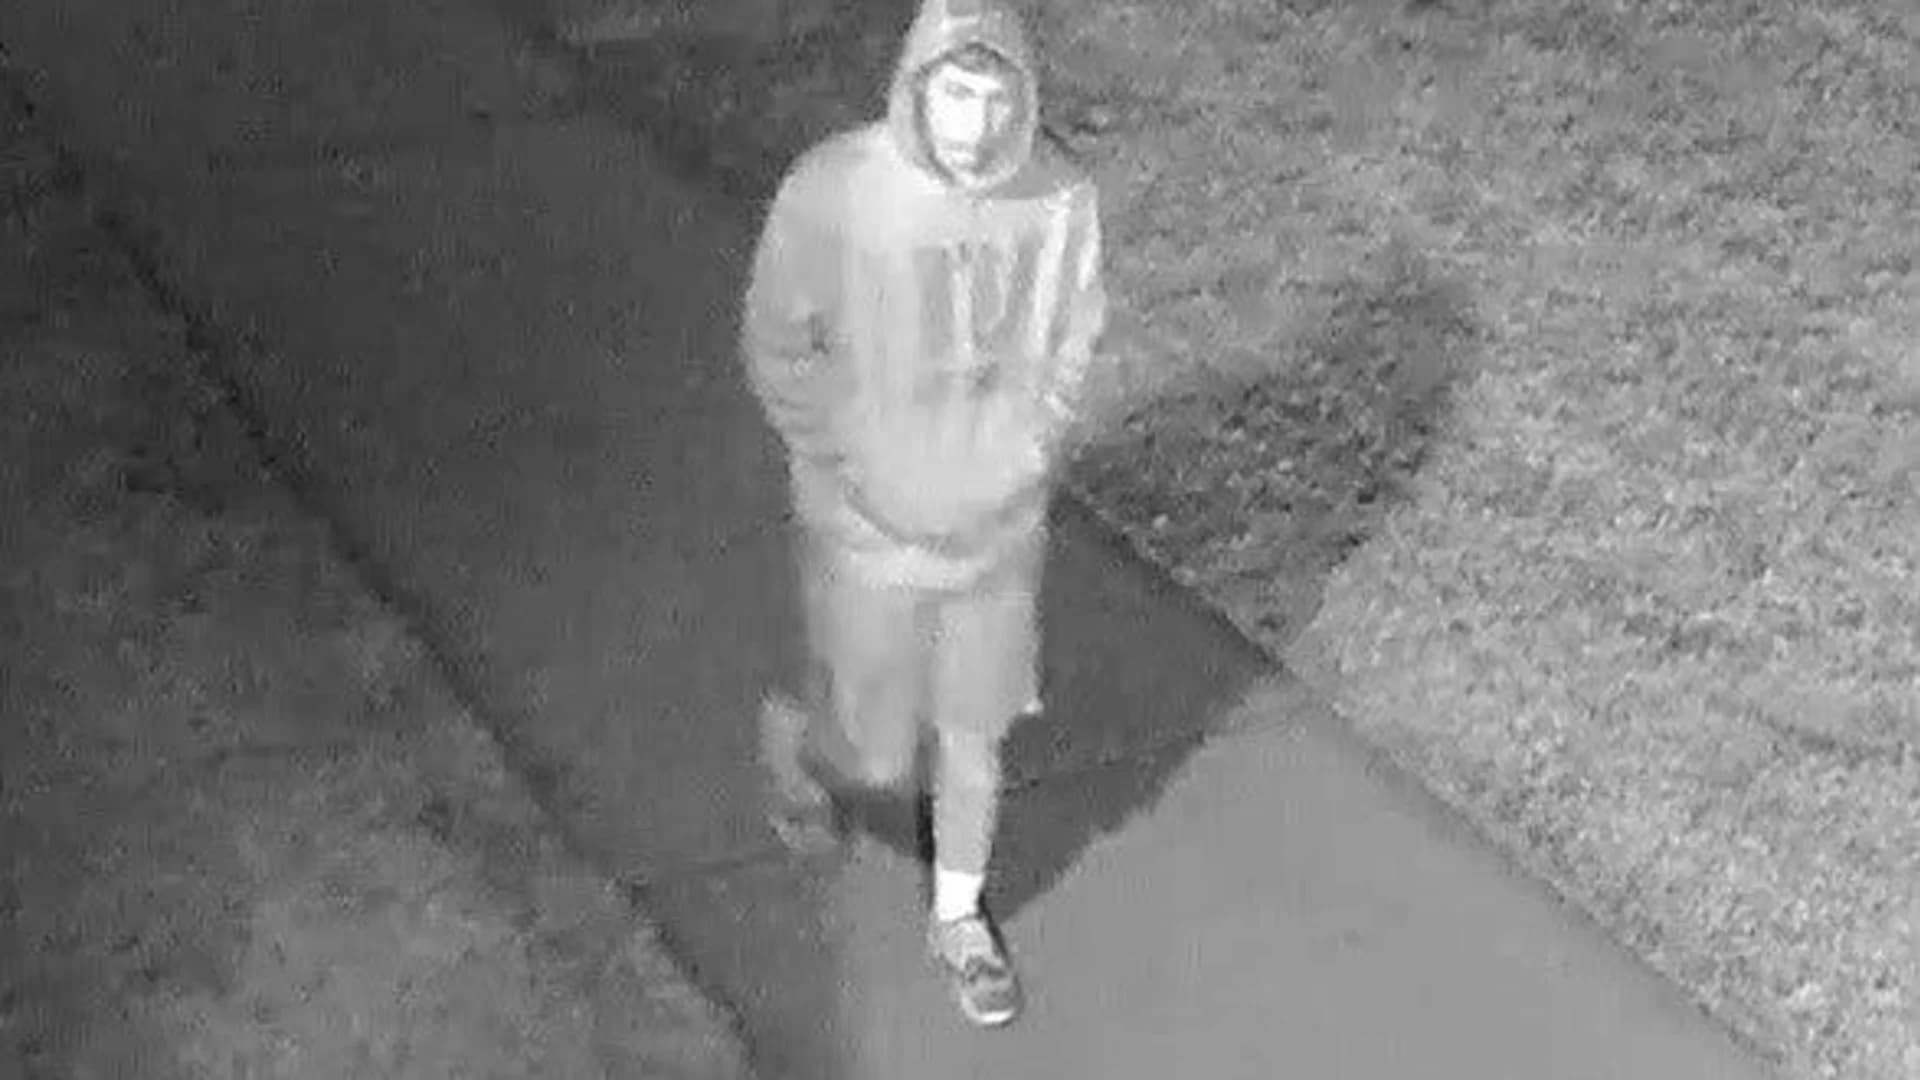 Police release photos of car, person in Syosset High School hate graffiti case